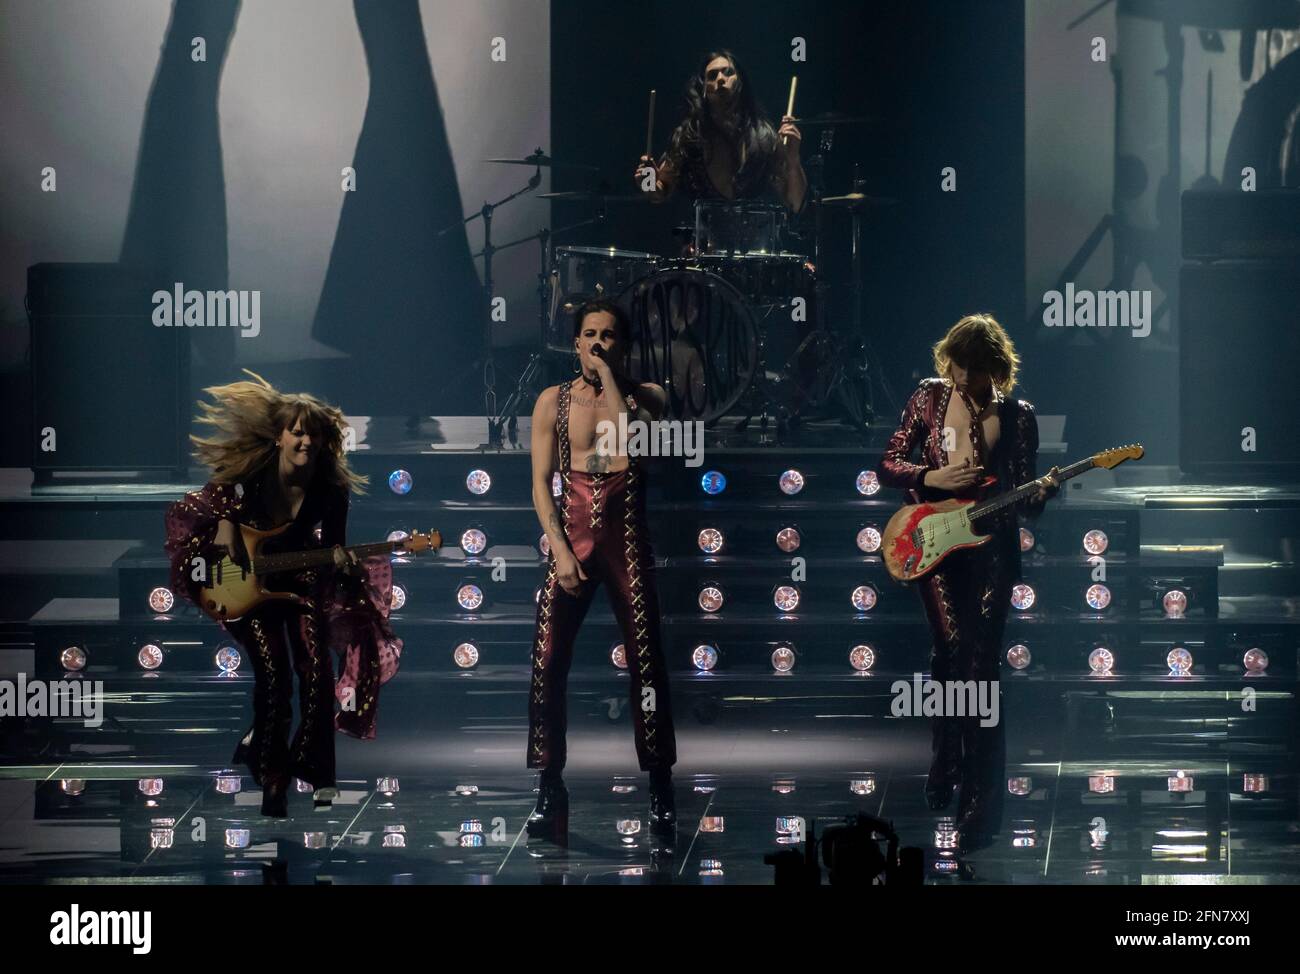 Rotterdam, Netherlands. 15th May 2021. Maneskin (Damiano David, Victoria De Angelis, Thomas Raggi, Ethan Torchio), representing Italy performing the song Zitti e buoni at the rehearsal of the Eurovision song contest 2021. Credit: Nearchos/Alamy Live News Stock Photo